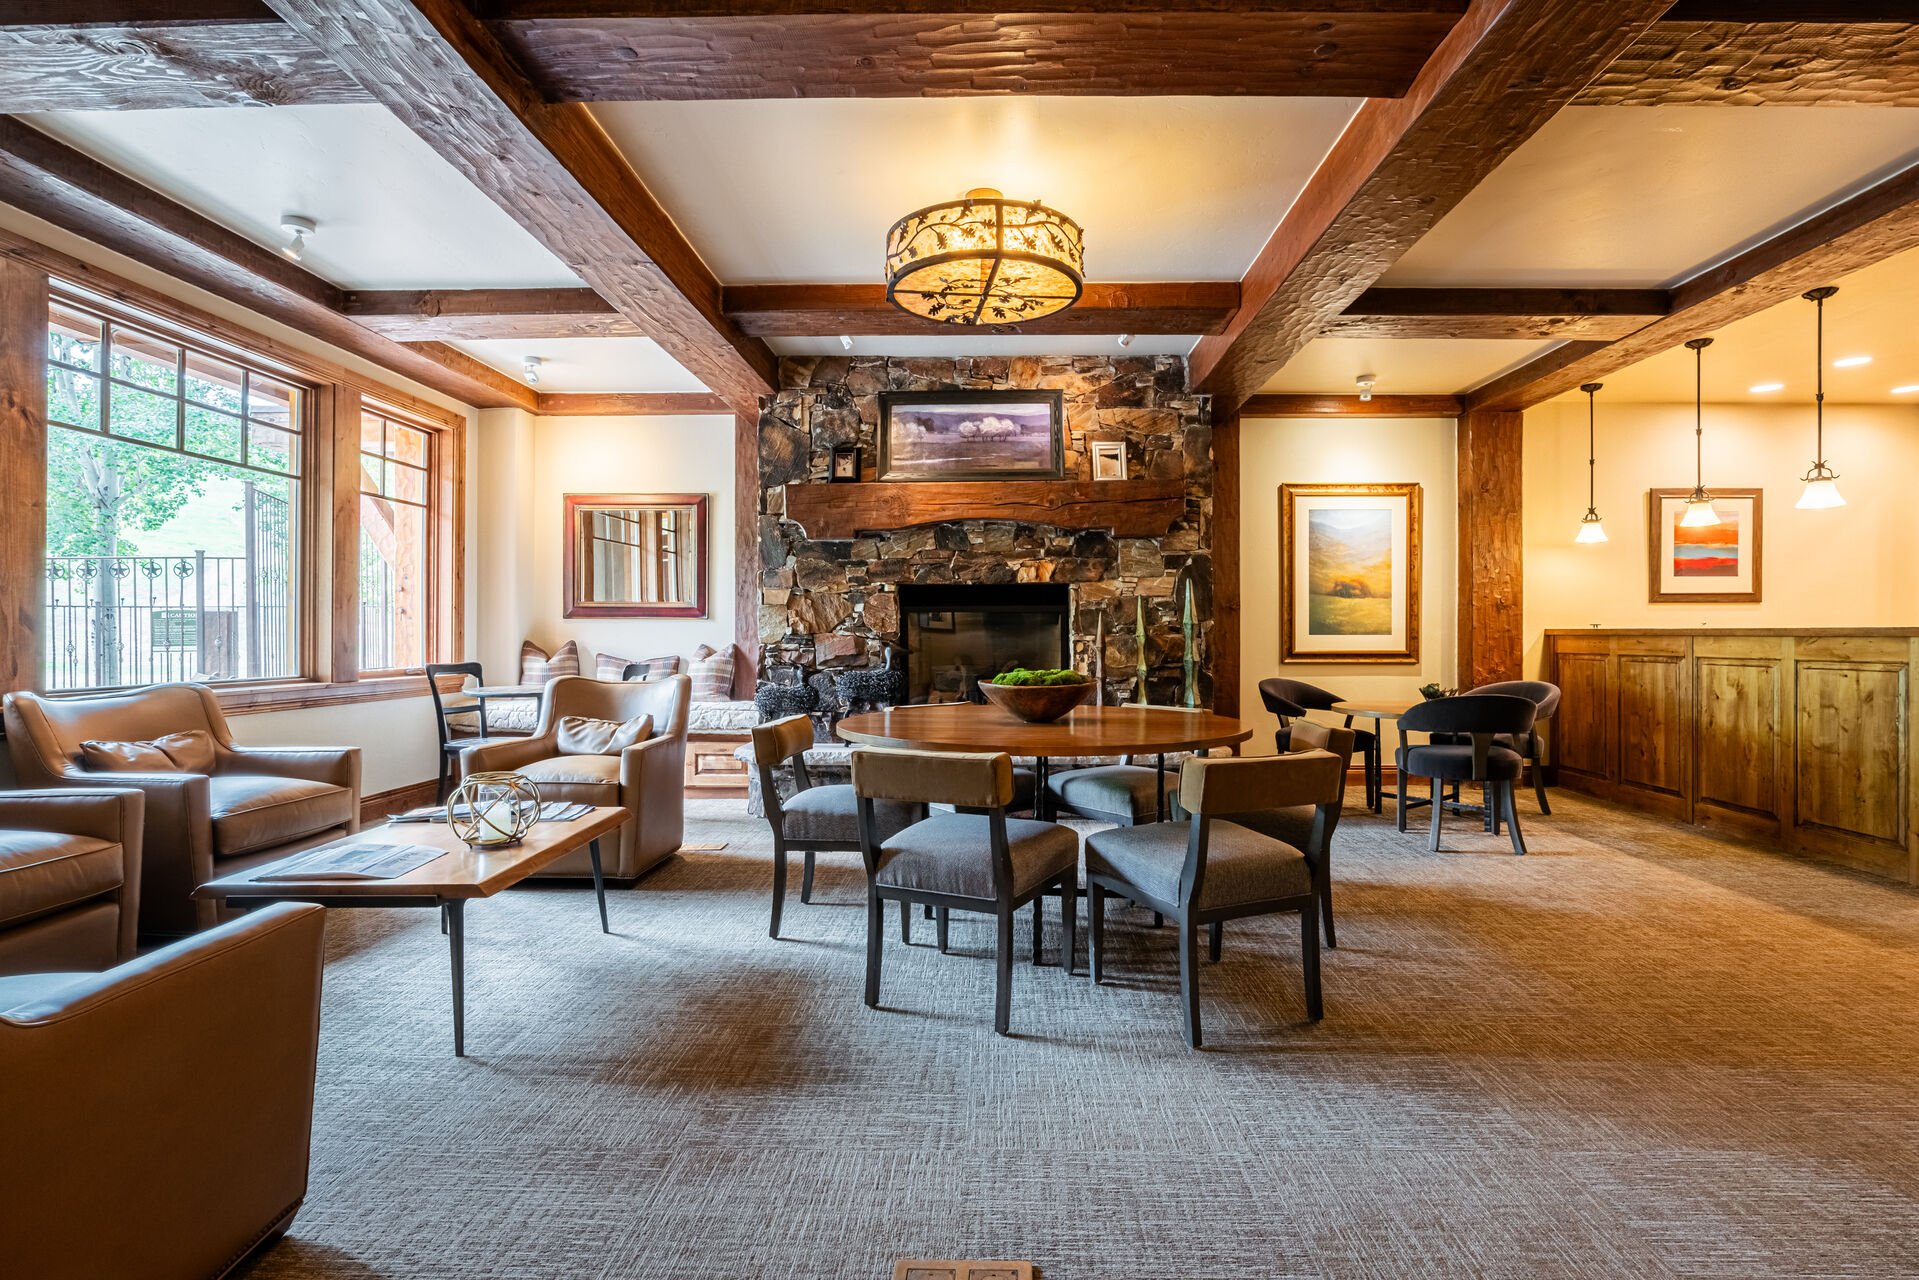 The Grand Lodge Skier's Lounge